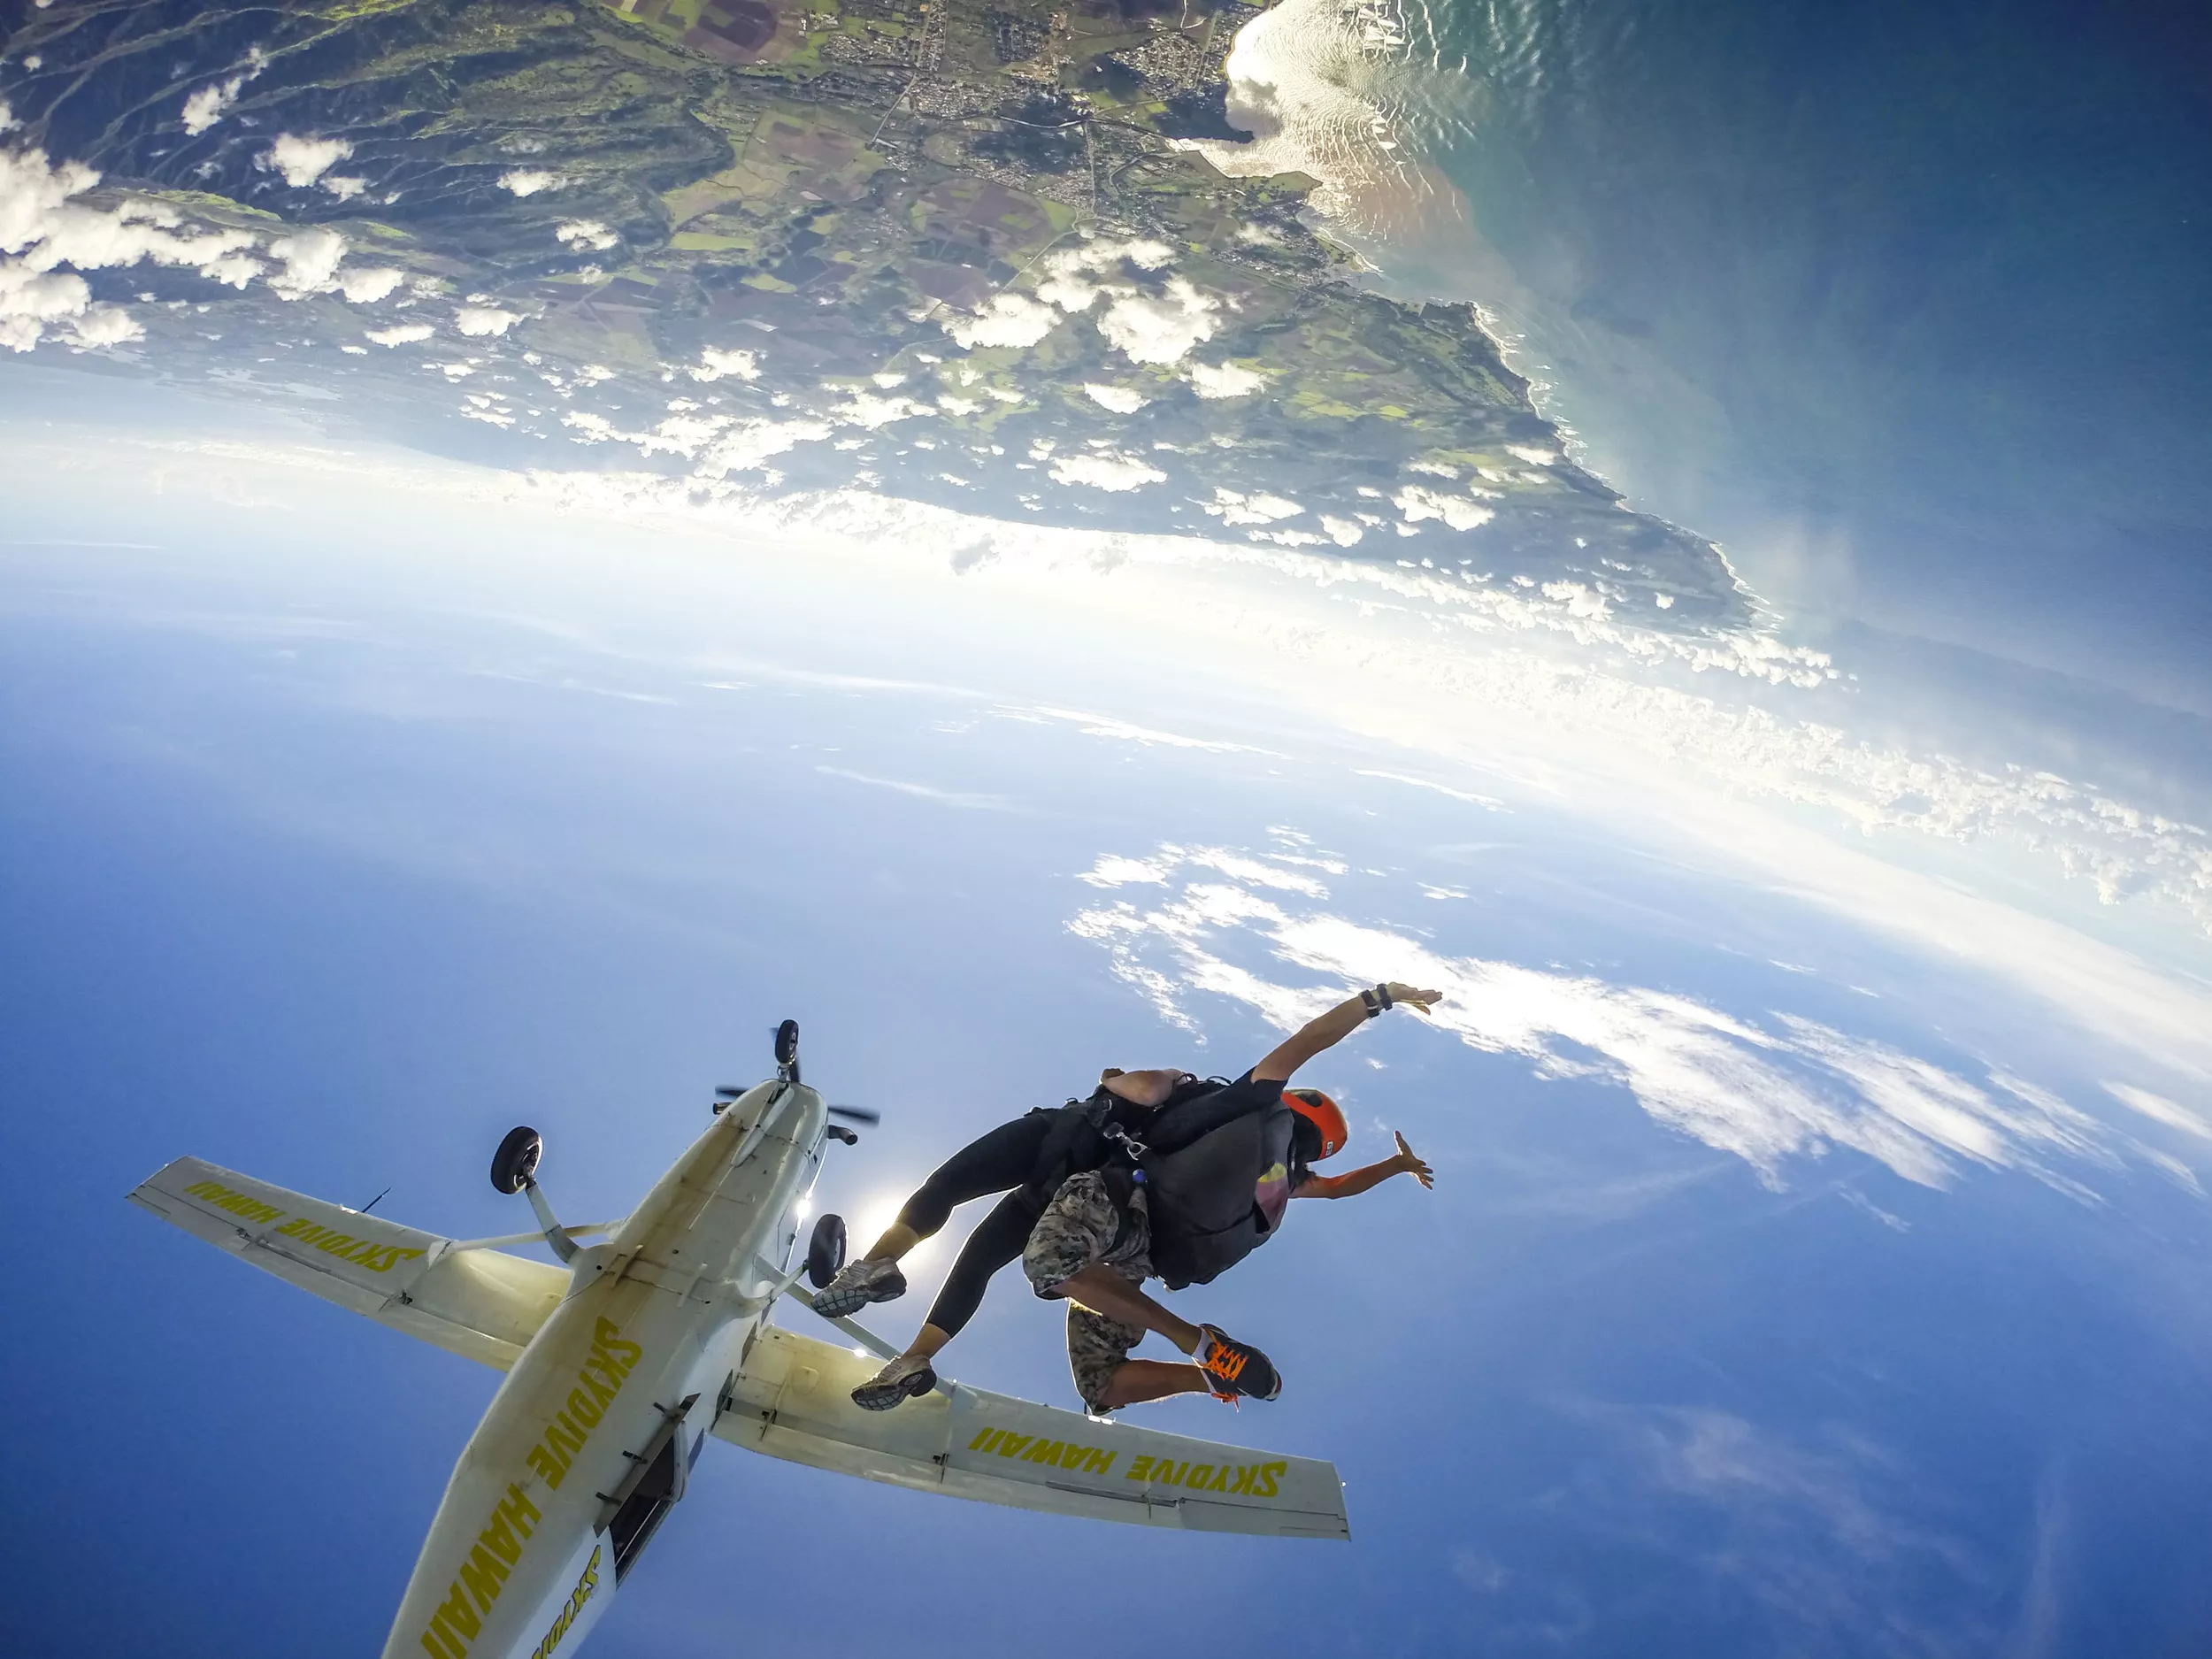 Skydive Hawaii in USA, North America | Skydiving - Rated 4.3